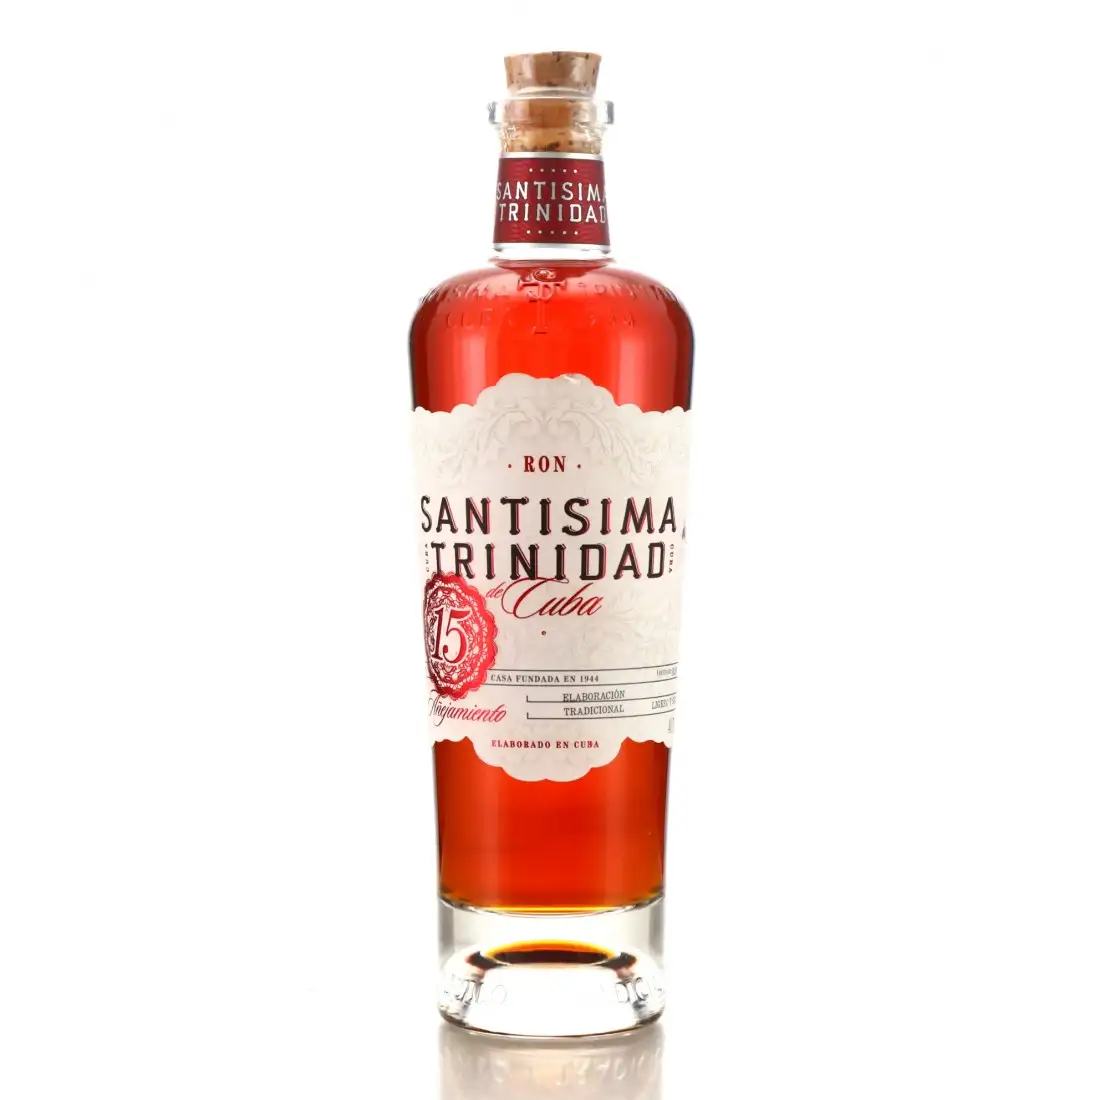 Image of the front of the bottle of the rum Santisima Trinidad 15YO